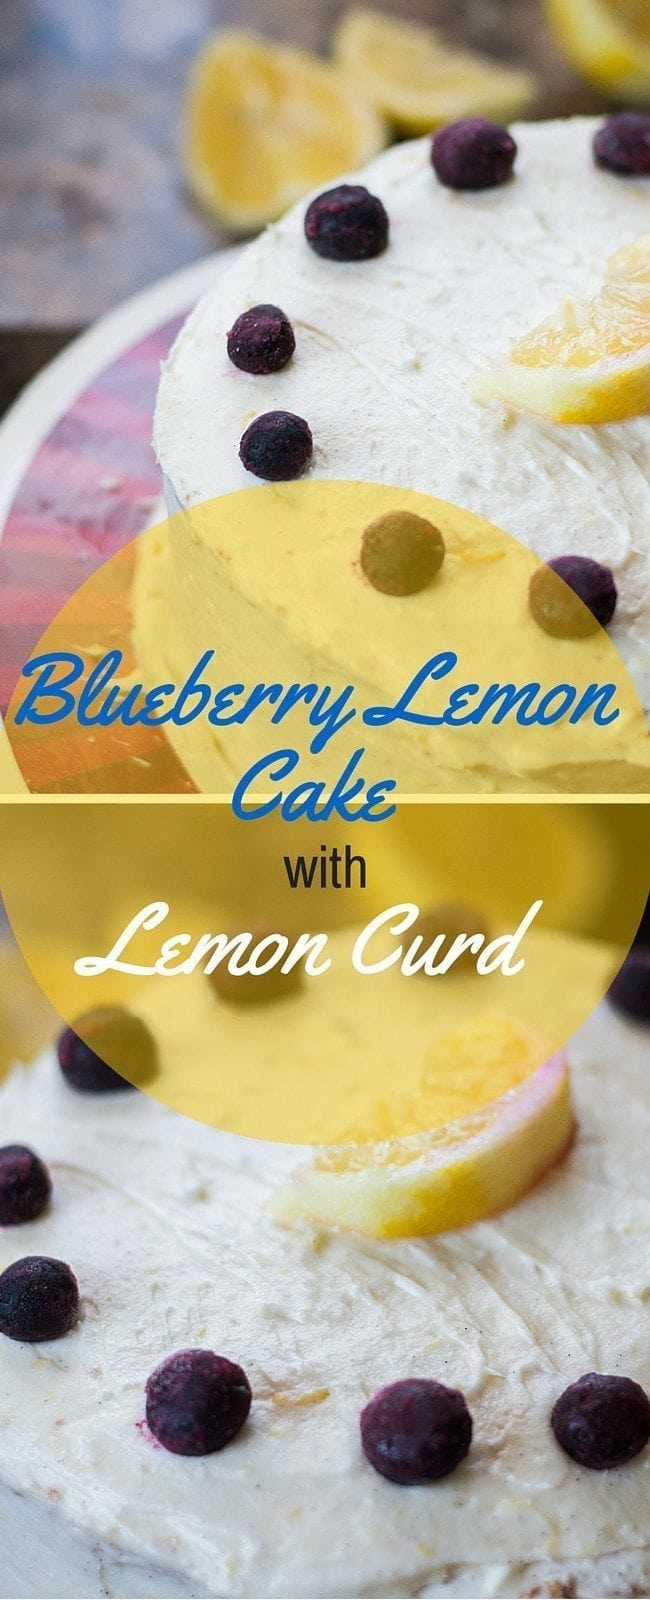 This bluberry lemon cake is filled with a creamy lemon curd and topped with lemon buttercream frosting. It's elegant and absolutely AMAZING.